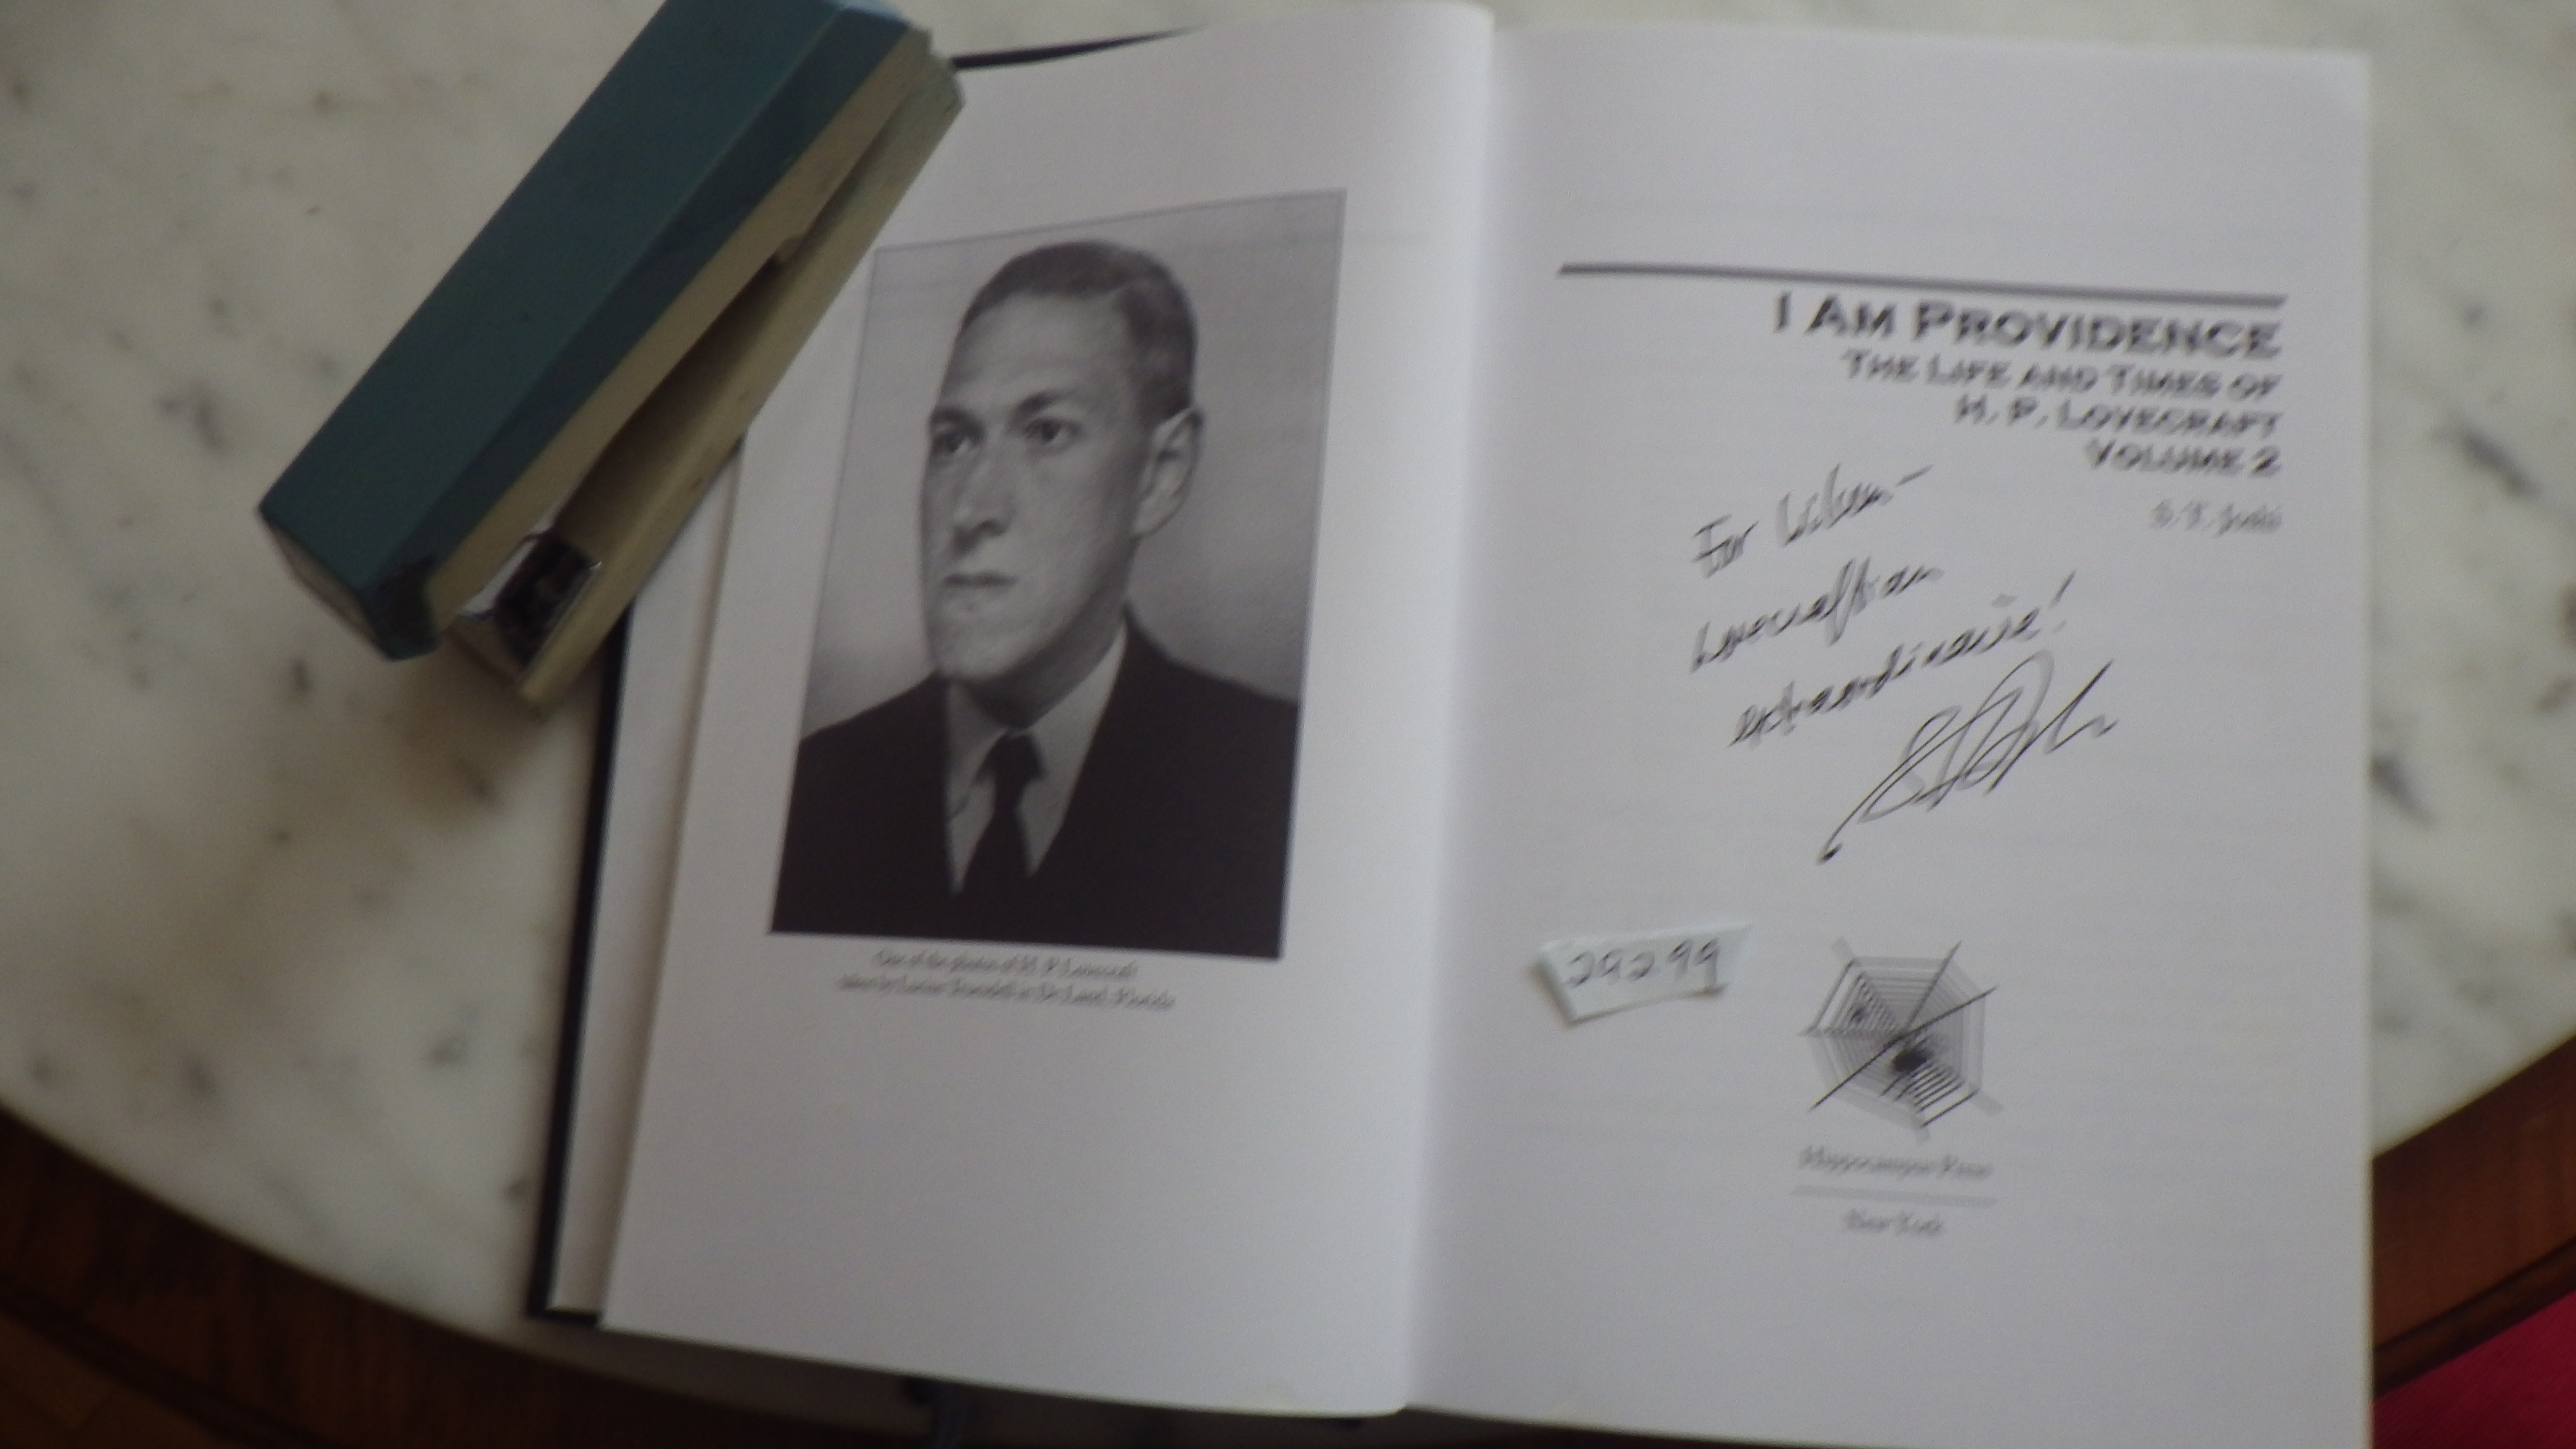 I am Providence The Life and Times of H. P. Lovecraft (VOLUME 1 & 2) SIGNED BY S. T. JOSHI - BY S. T. Joshi, FLAT SIGNED & INSCRIBED, SCHOLAR & BIOGRAPHER writing on H. P. LOVERCRAFT, 2 VOLS EACH SIGNED, 2ND VOL NO INSCRIPTION